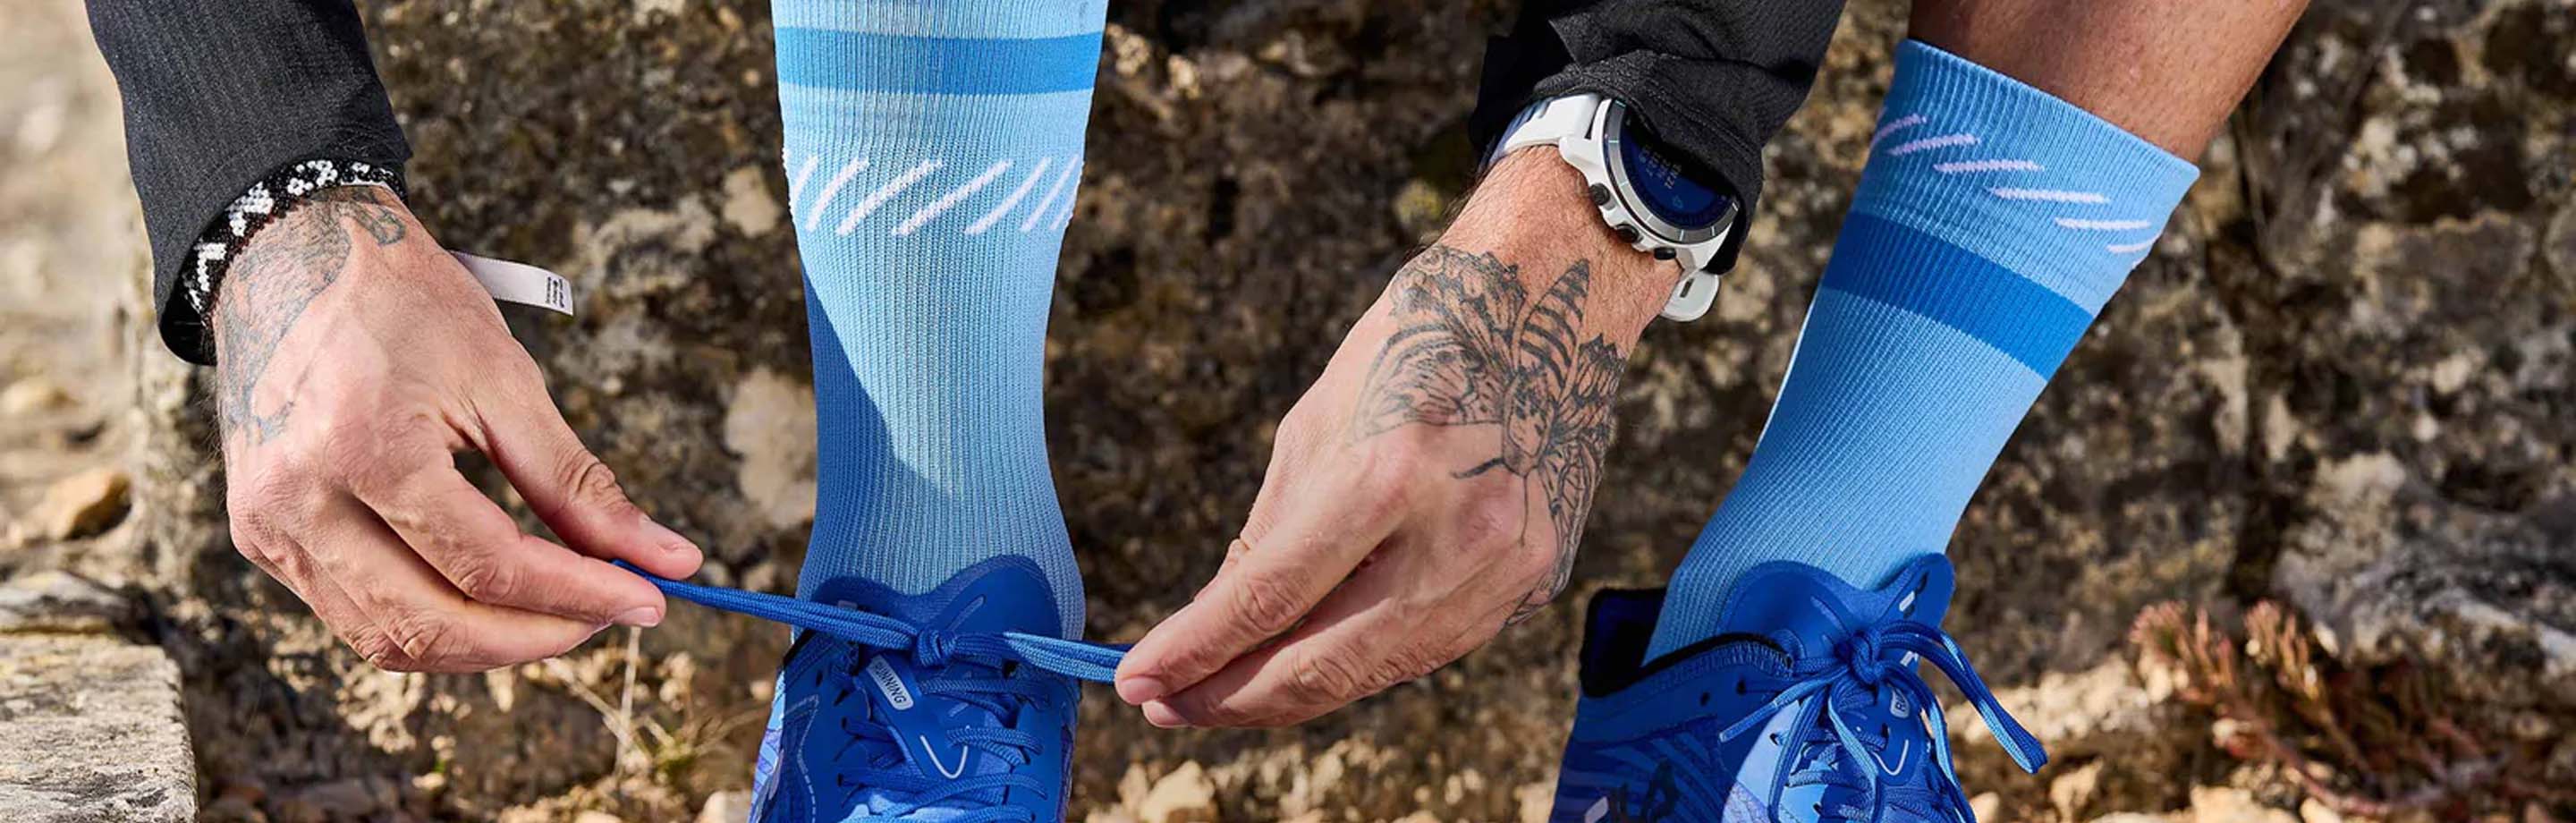 INCYLENCE Socks for Running, Cycling & Triathlon with Special Design